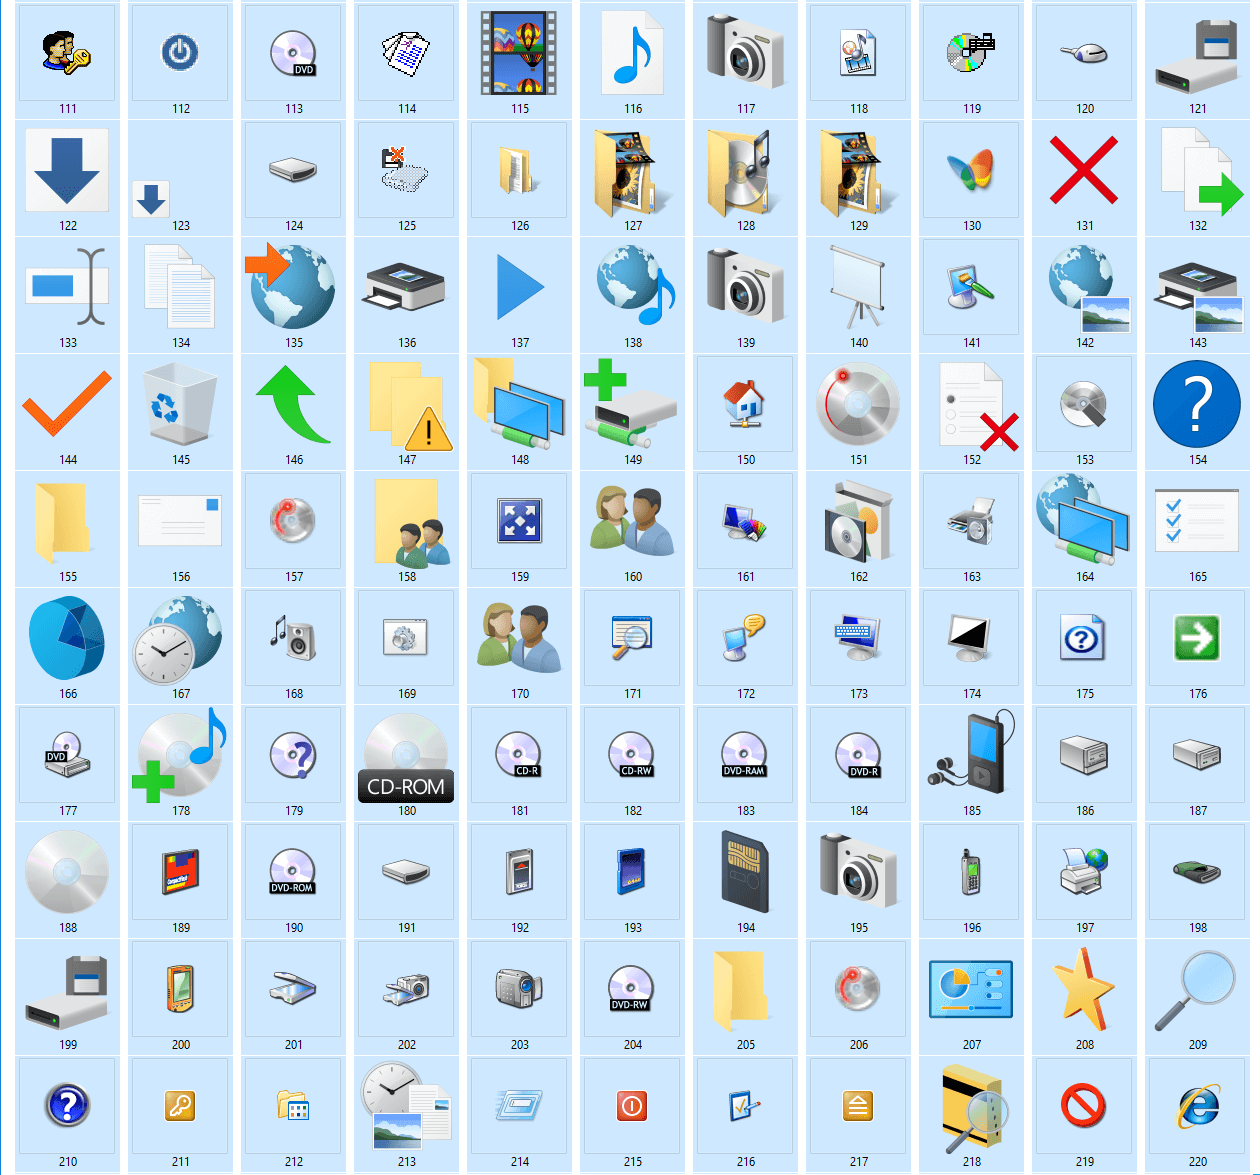 Windows 10 icons of shell32.dll (2/3)